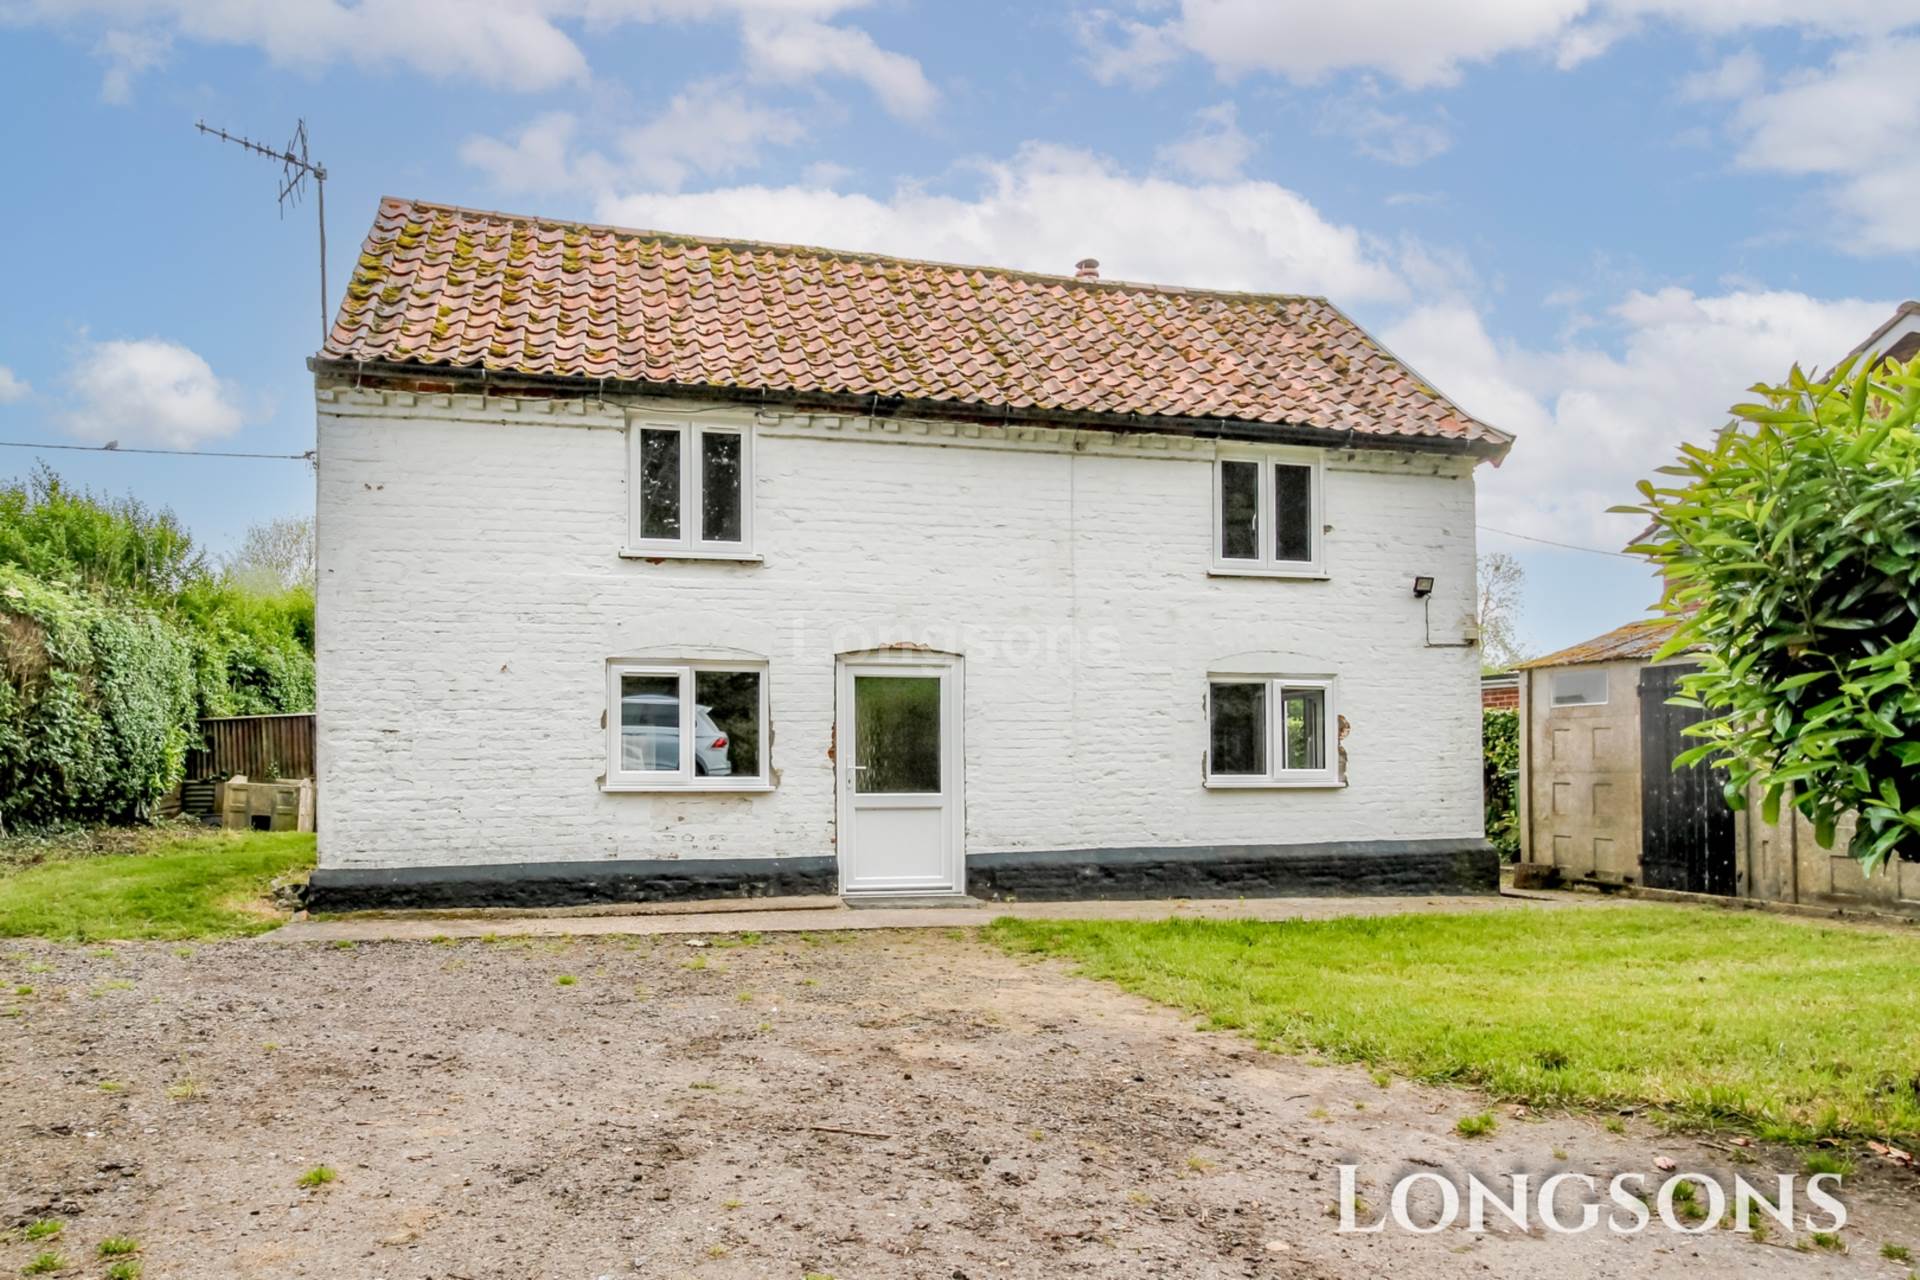 3 bed Detached House for rent in Dereham. From Longsons - Swaffham